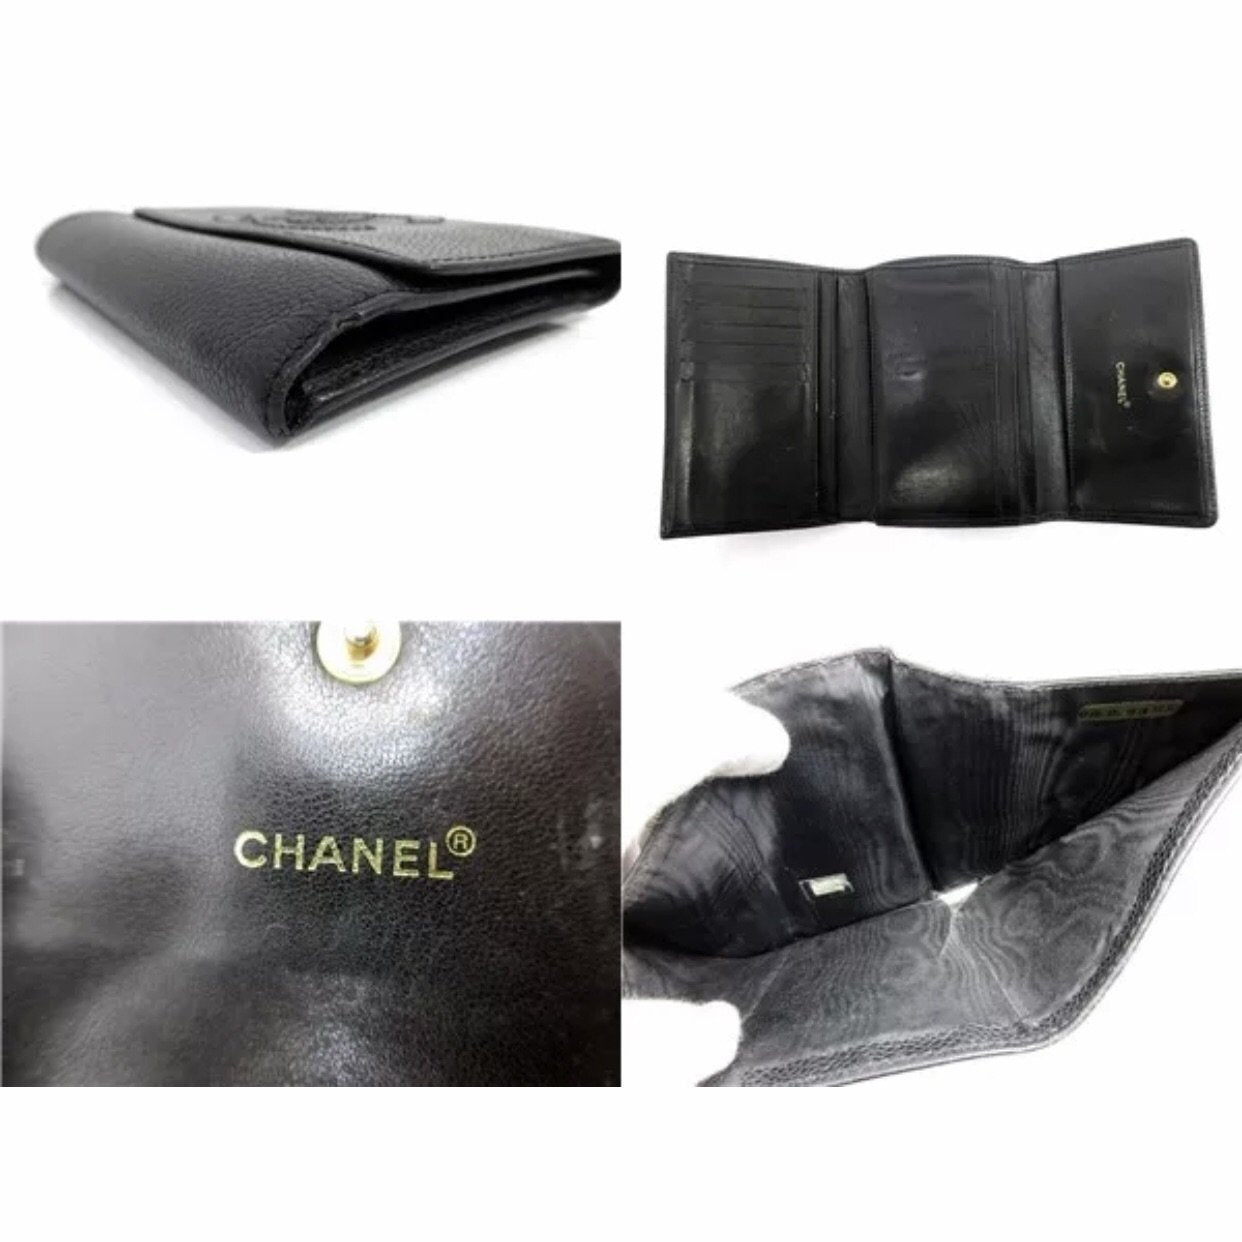 Authentic CHANEL Timeless Classic Line 50097 Wallet #260-004-284-3184